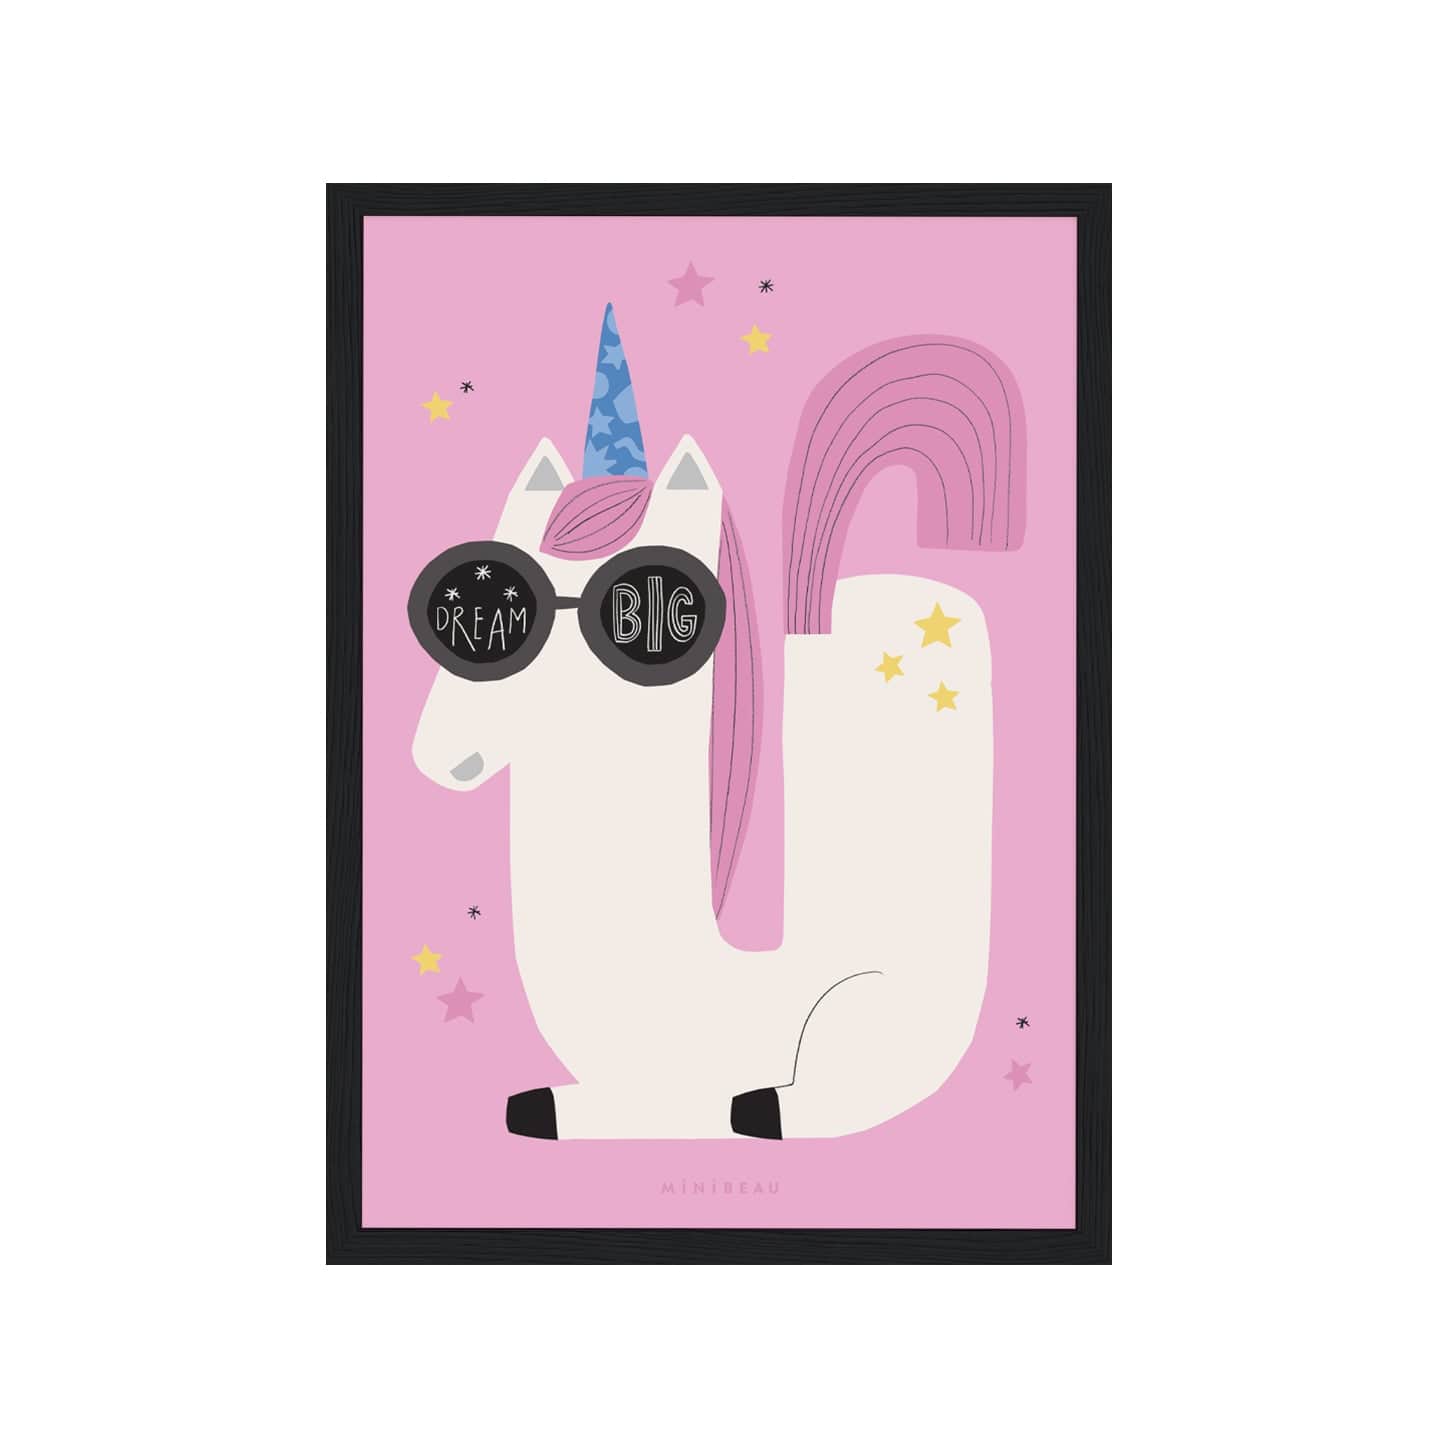 Art print in a black frame. Our Happy Alphabet 'U' Art Print shows a cool, sunglasses-wearing white unicorn, laying in the shape of a U with a pink tail and blue horn with yellow stars on its back. The words DREAM BIG are in the lenses of the sunglasses. All on a pink background.